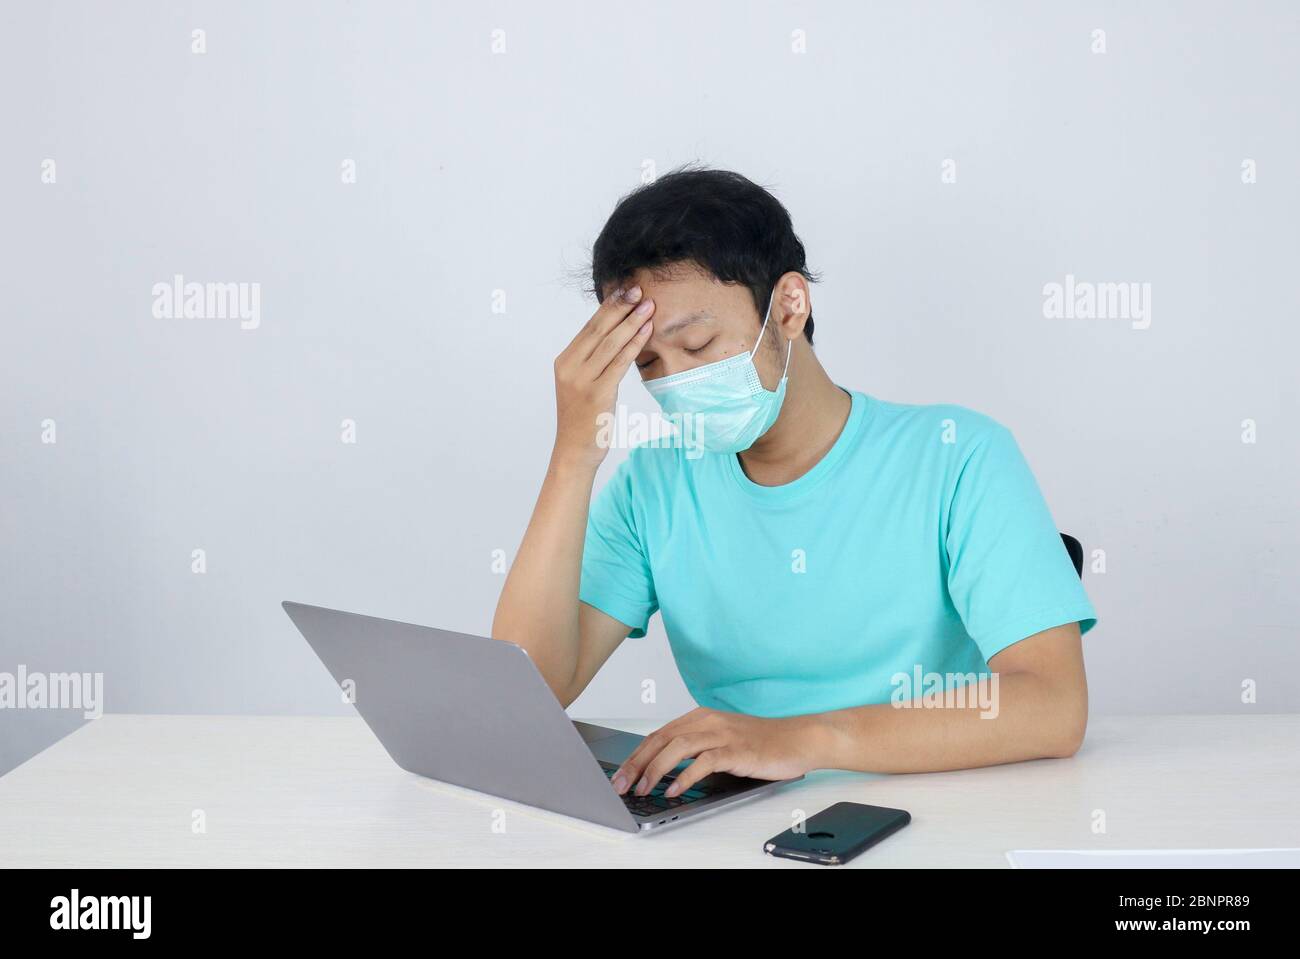 Young Asian man wearing medical mask is feeling unhealthy, tired, and confused with working in laptops on the table. Stock Photo